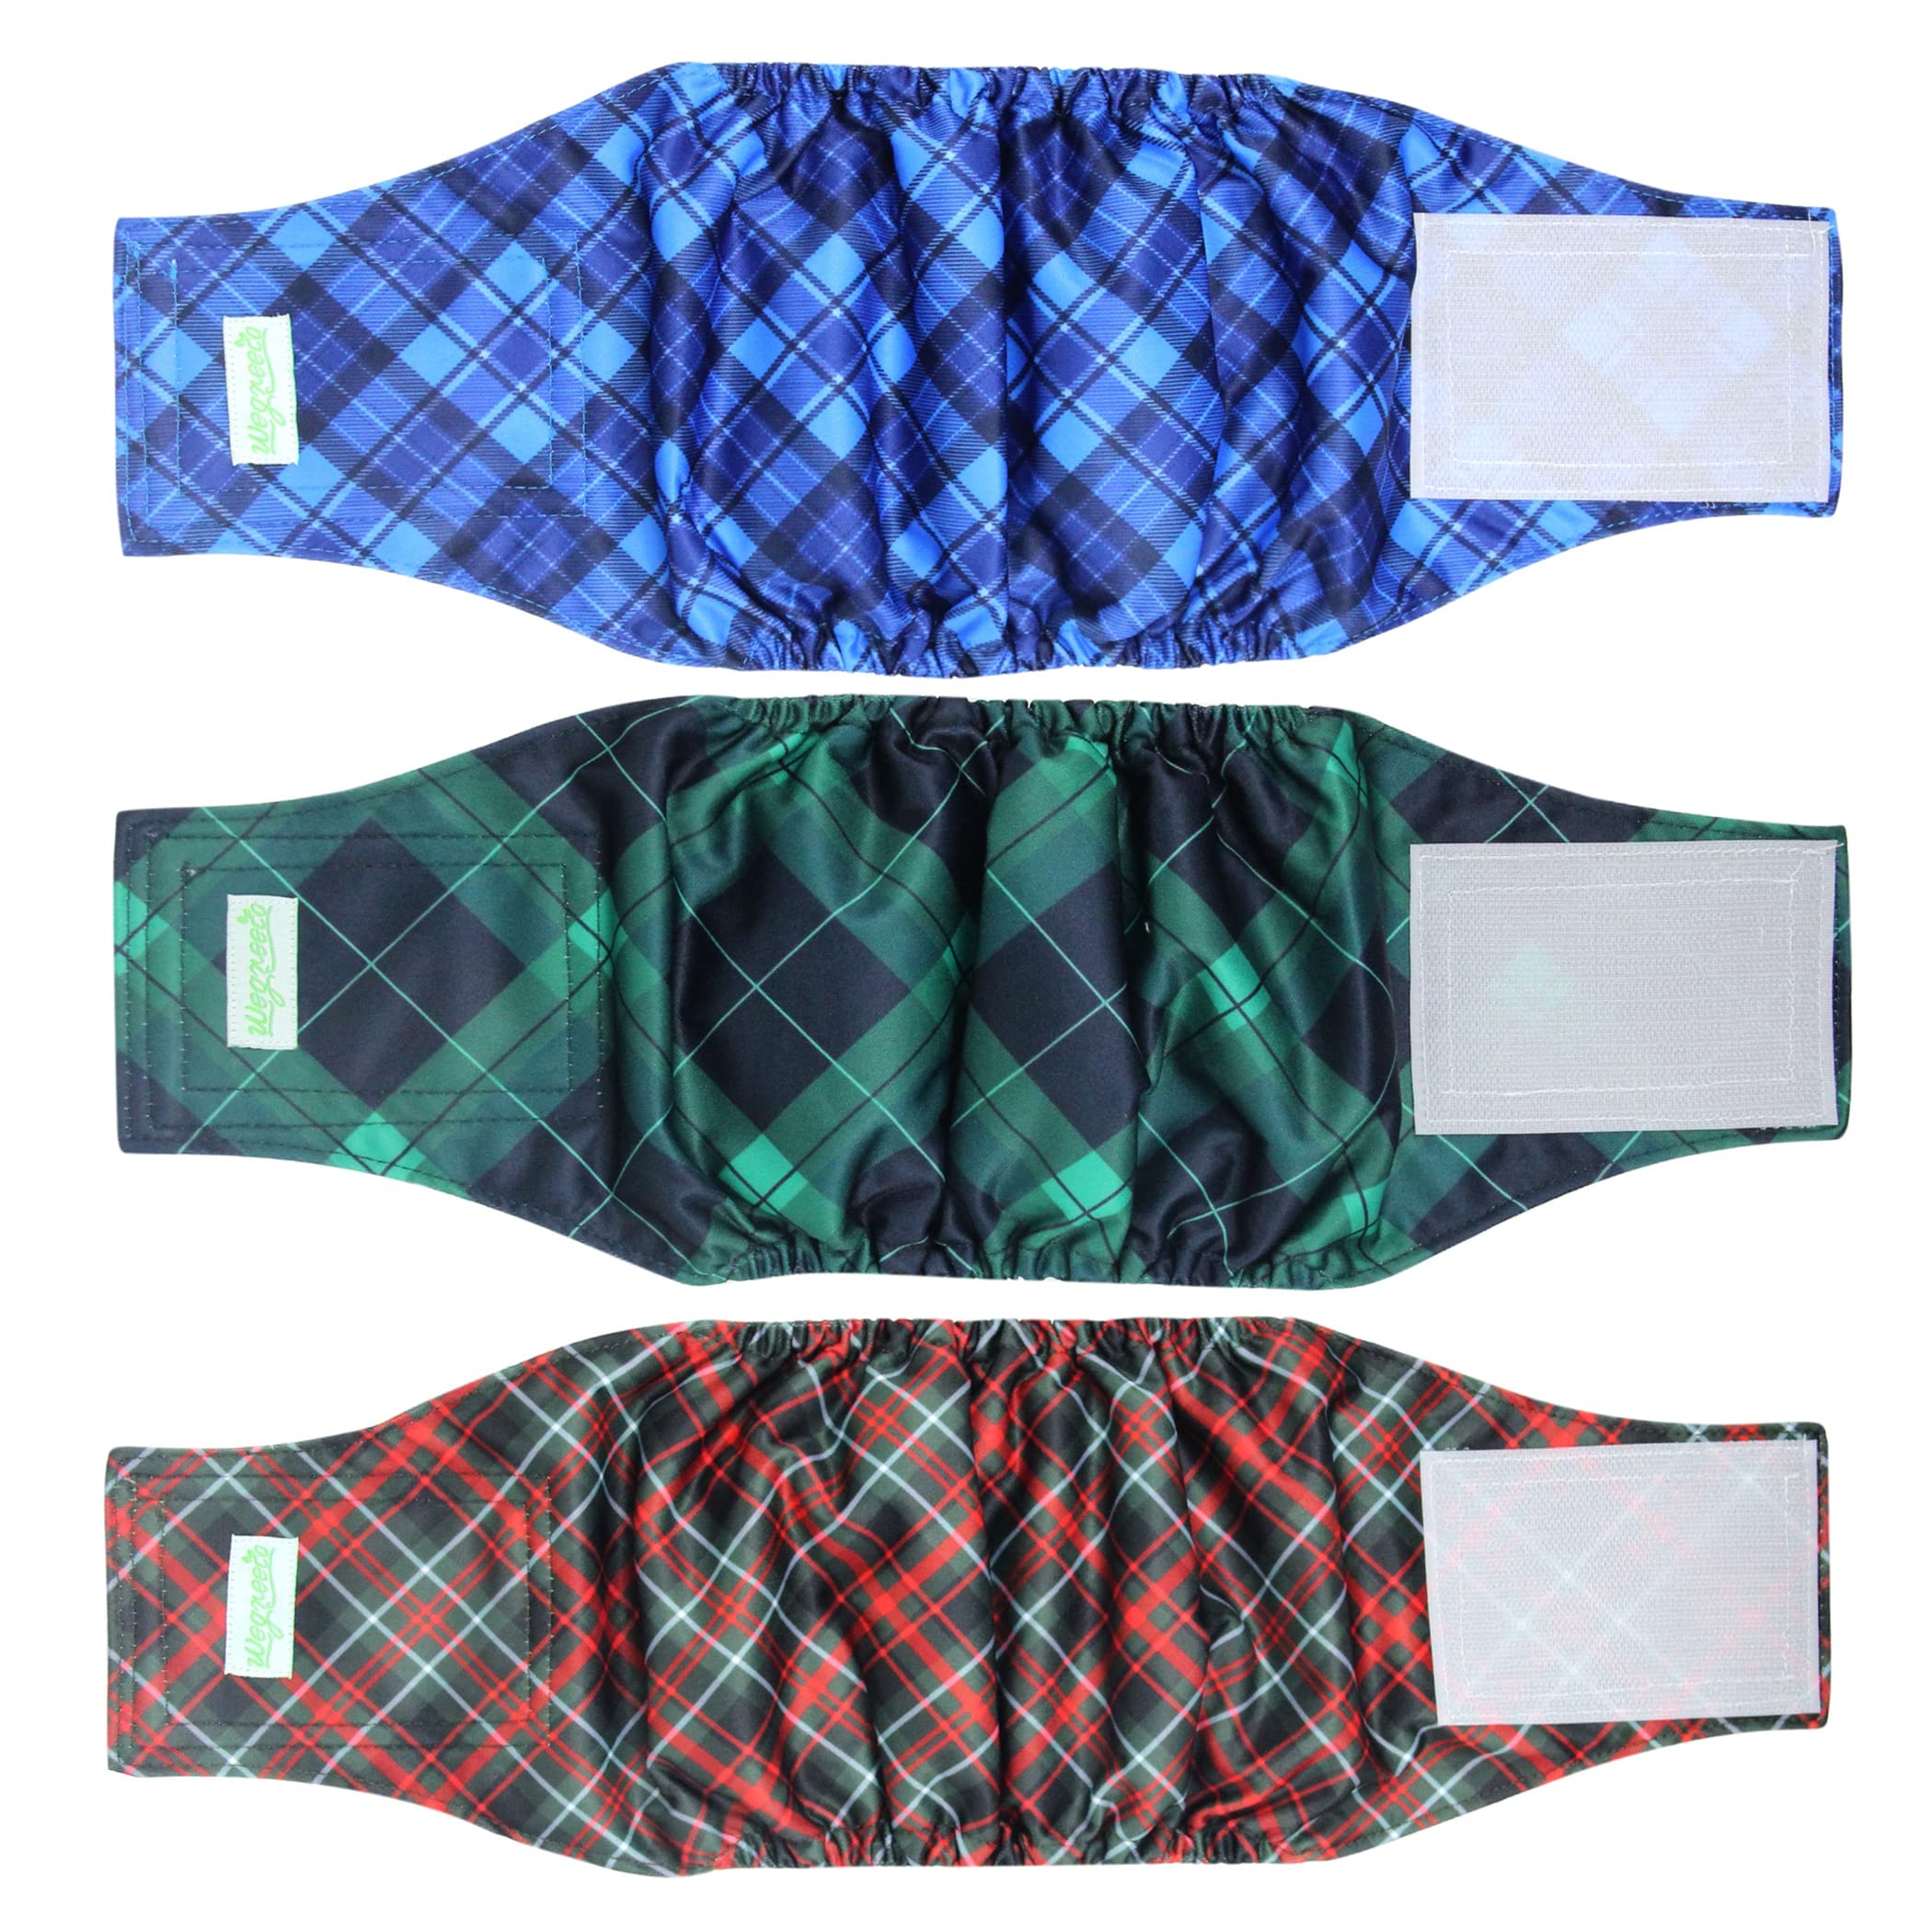 Dog Belly Band, Male Dog Diapers, 3-Pack (Plaid)